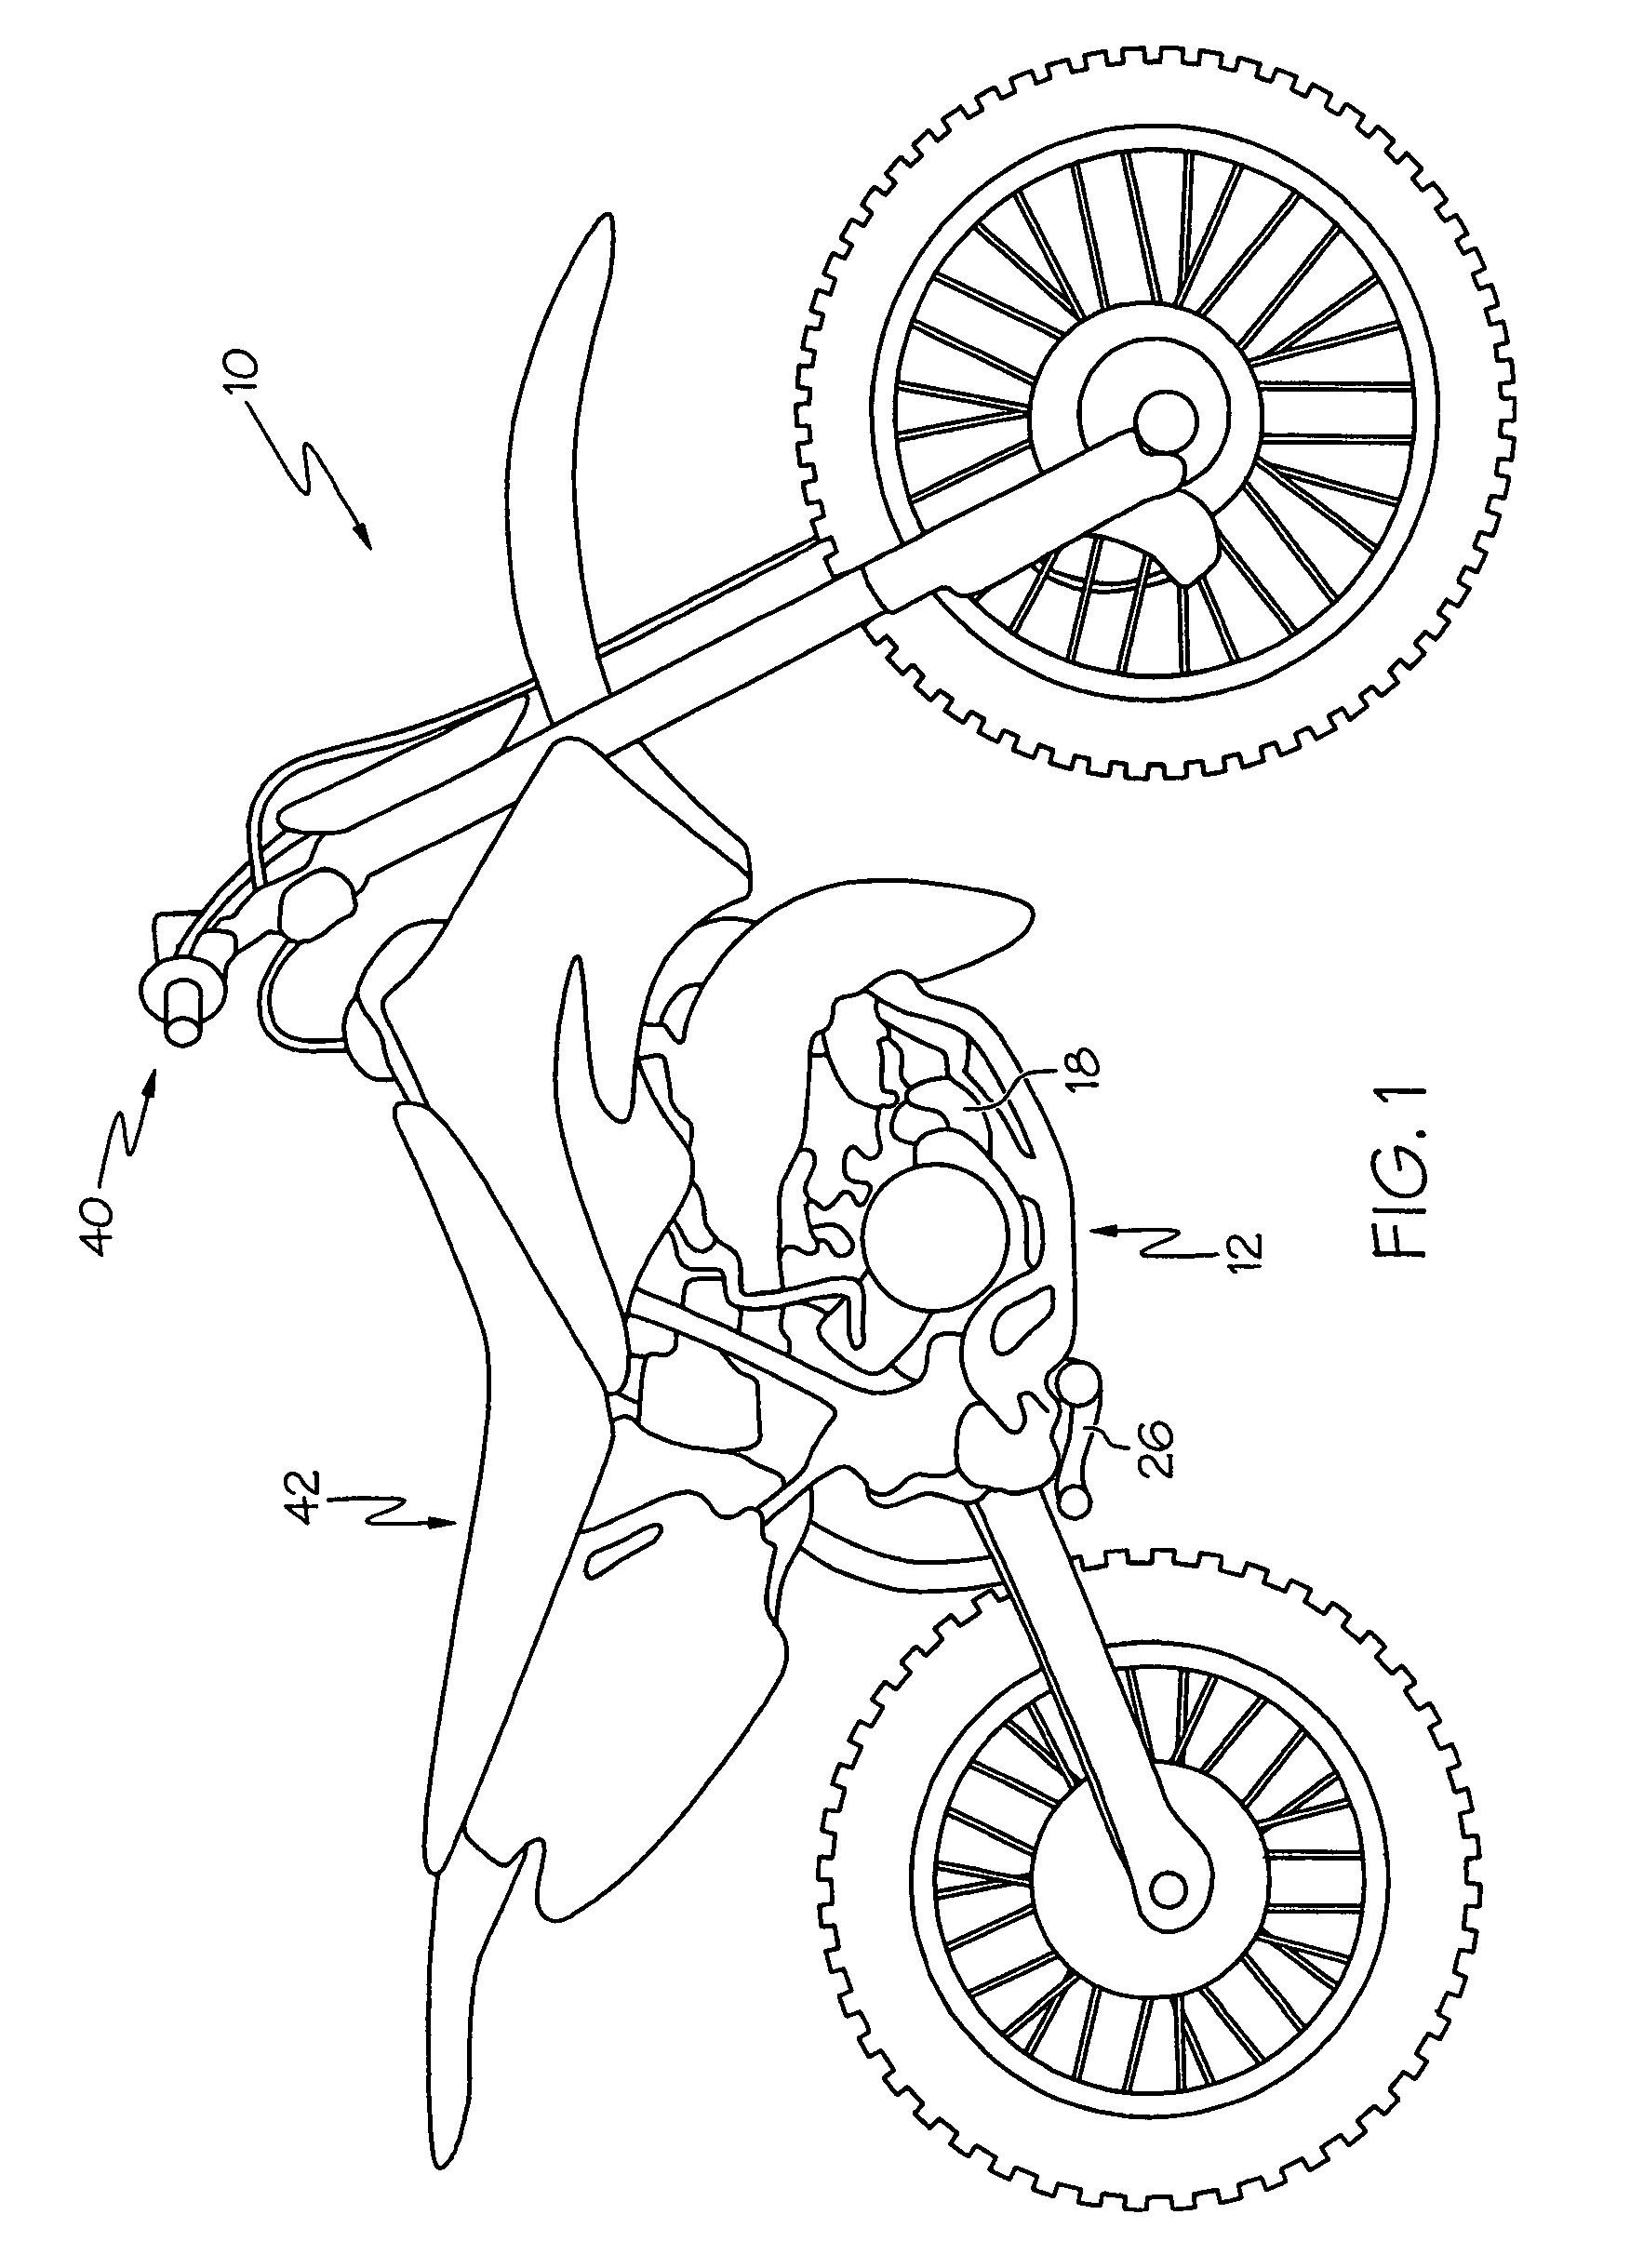 Power equipment apparatus having engine with electric starter motor and manual starter mechanism